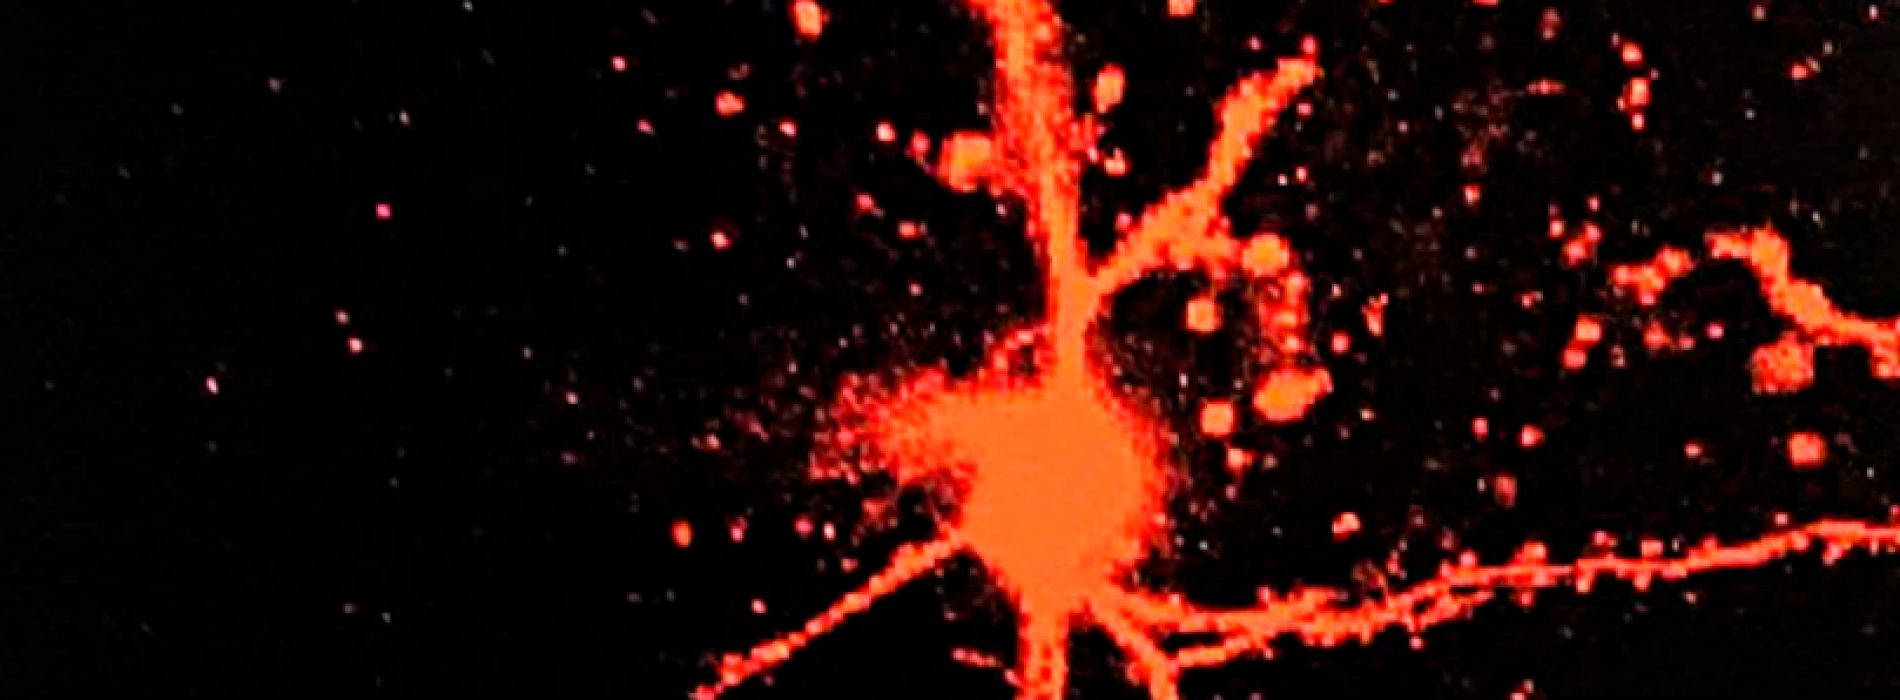 Amazing image of a group of neurons make synapses